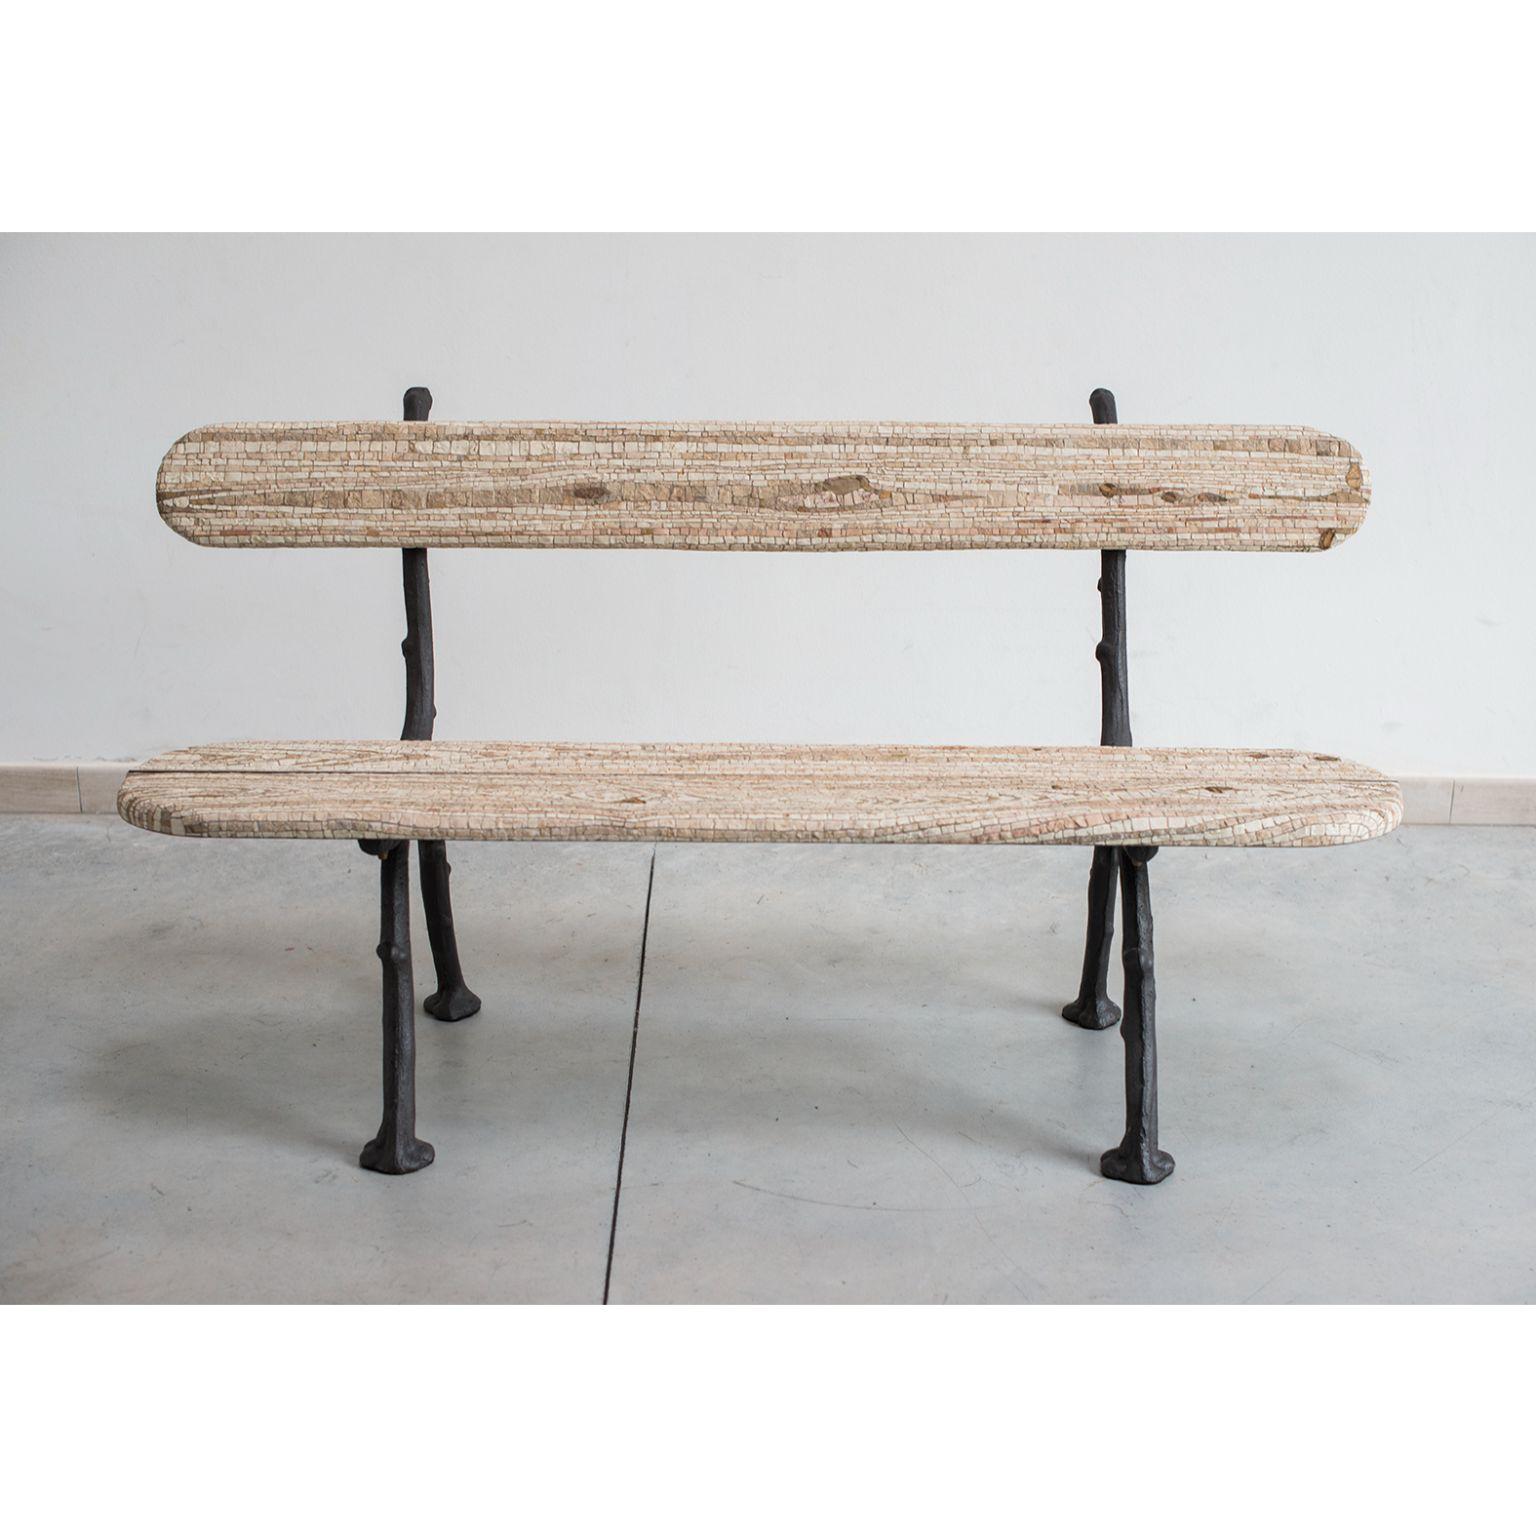 Panchina camel Antique bench by Yukiko Nagai
Dimensions: D55 x W152 x H85 cm
Material: Iron, Marble, Natural stone, Cement, Stucco
Weight: 60 kg 

An old vintage bench made of iron and wood has been used as a subject for a new mosaic bench with